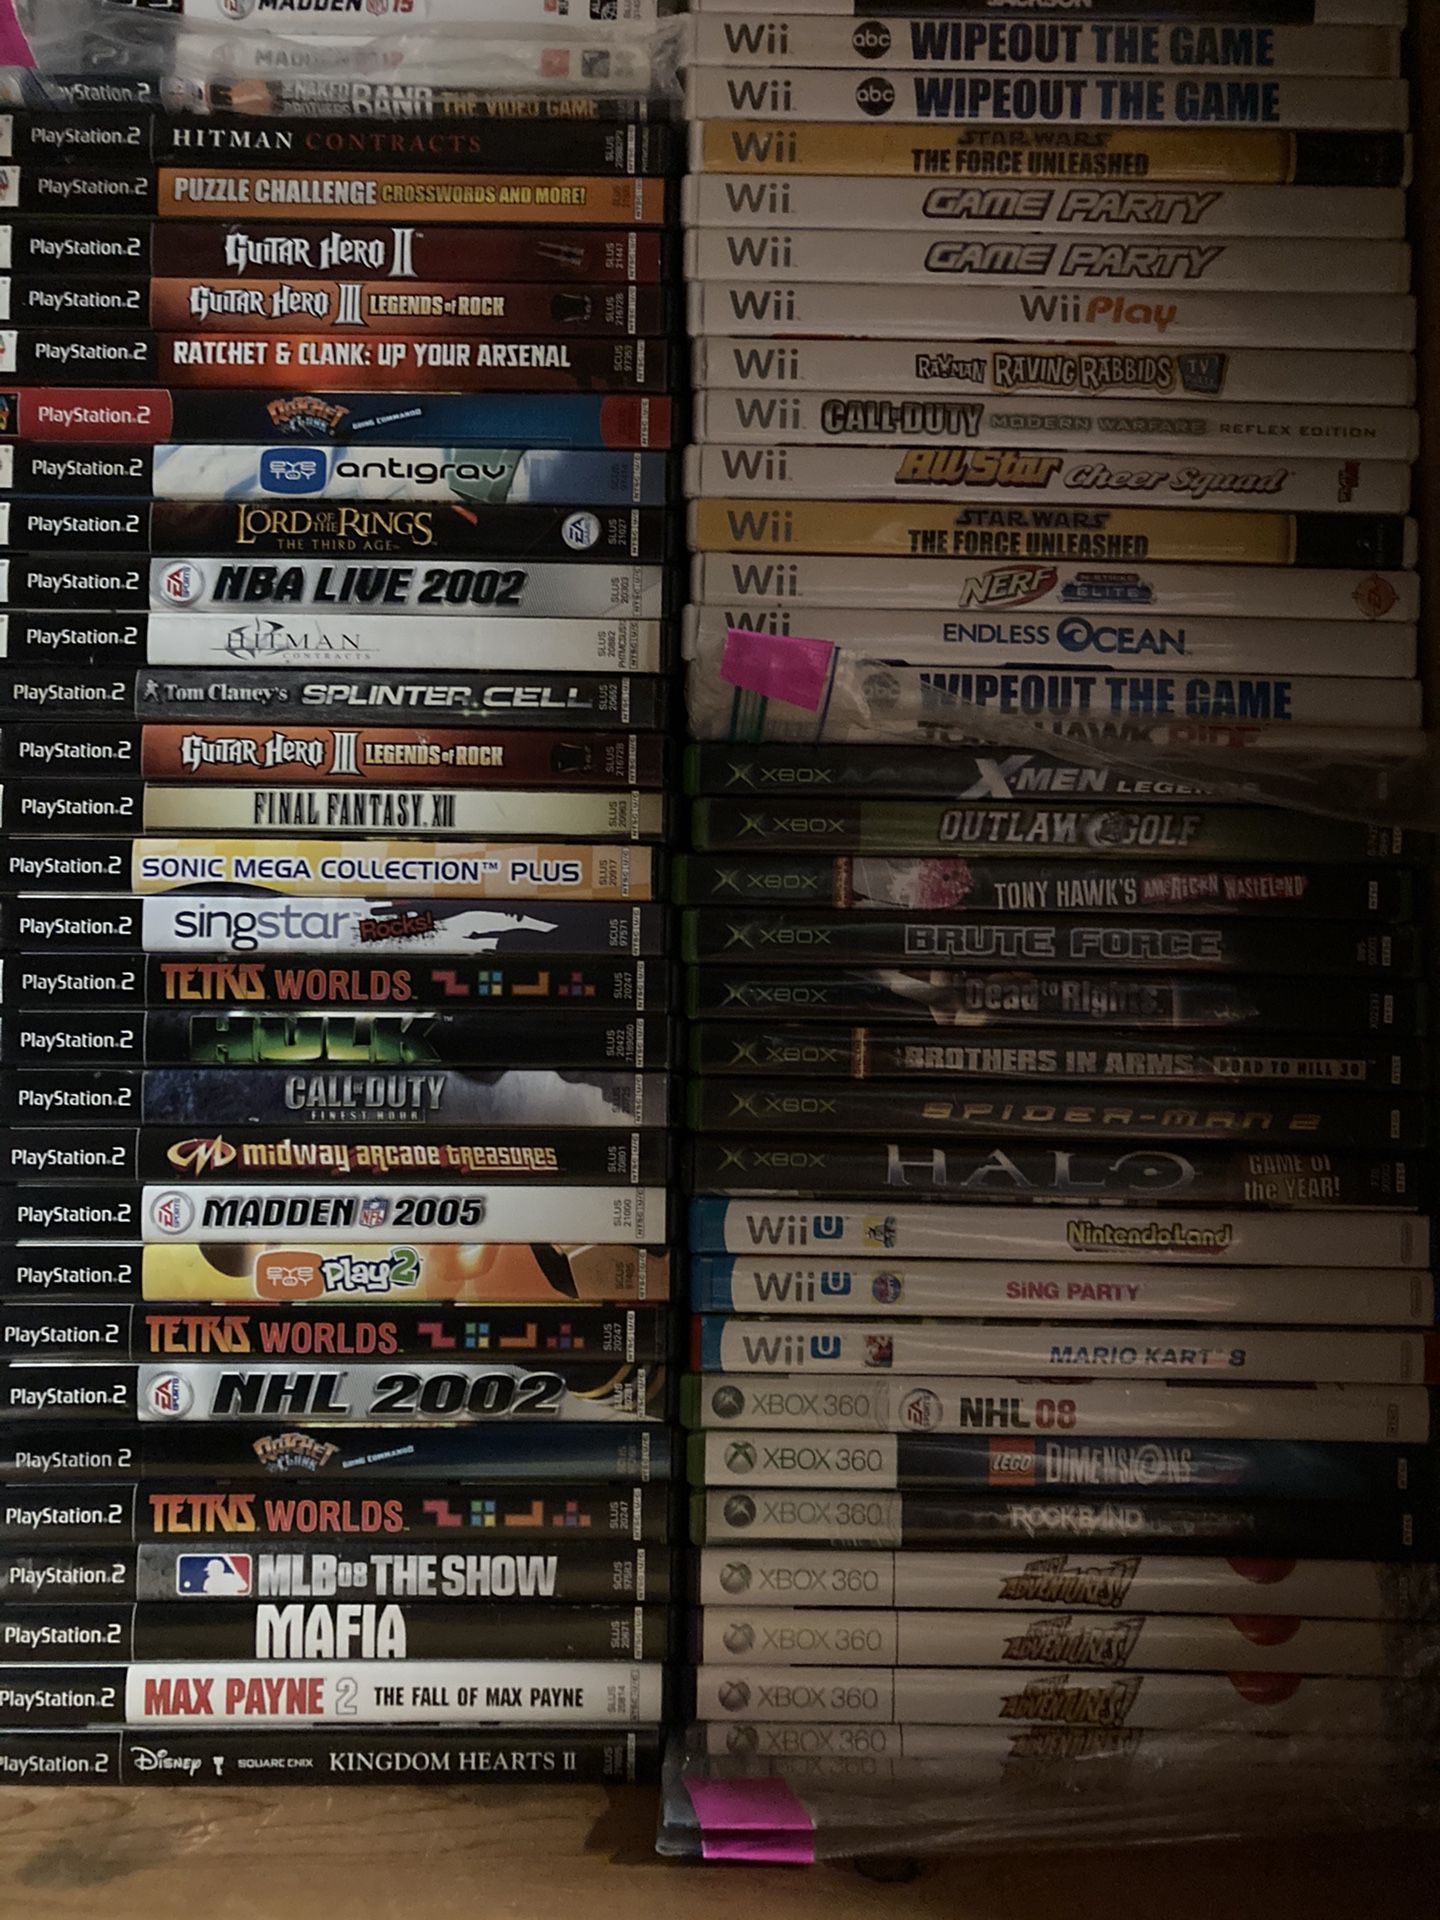 Complete Games Ps1, Ps2, PS3, Ps4, Xbox,360, Wii, Wii U, Genesis